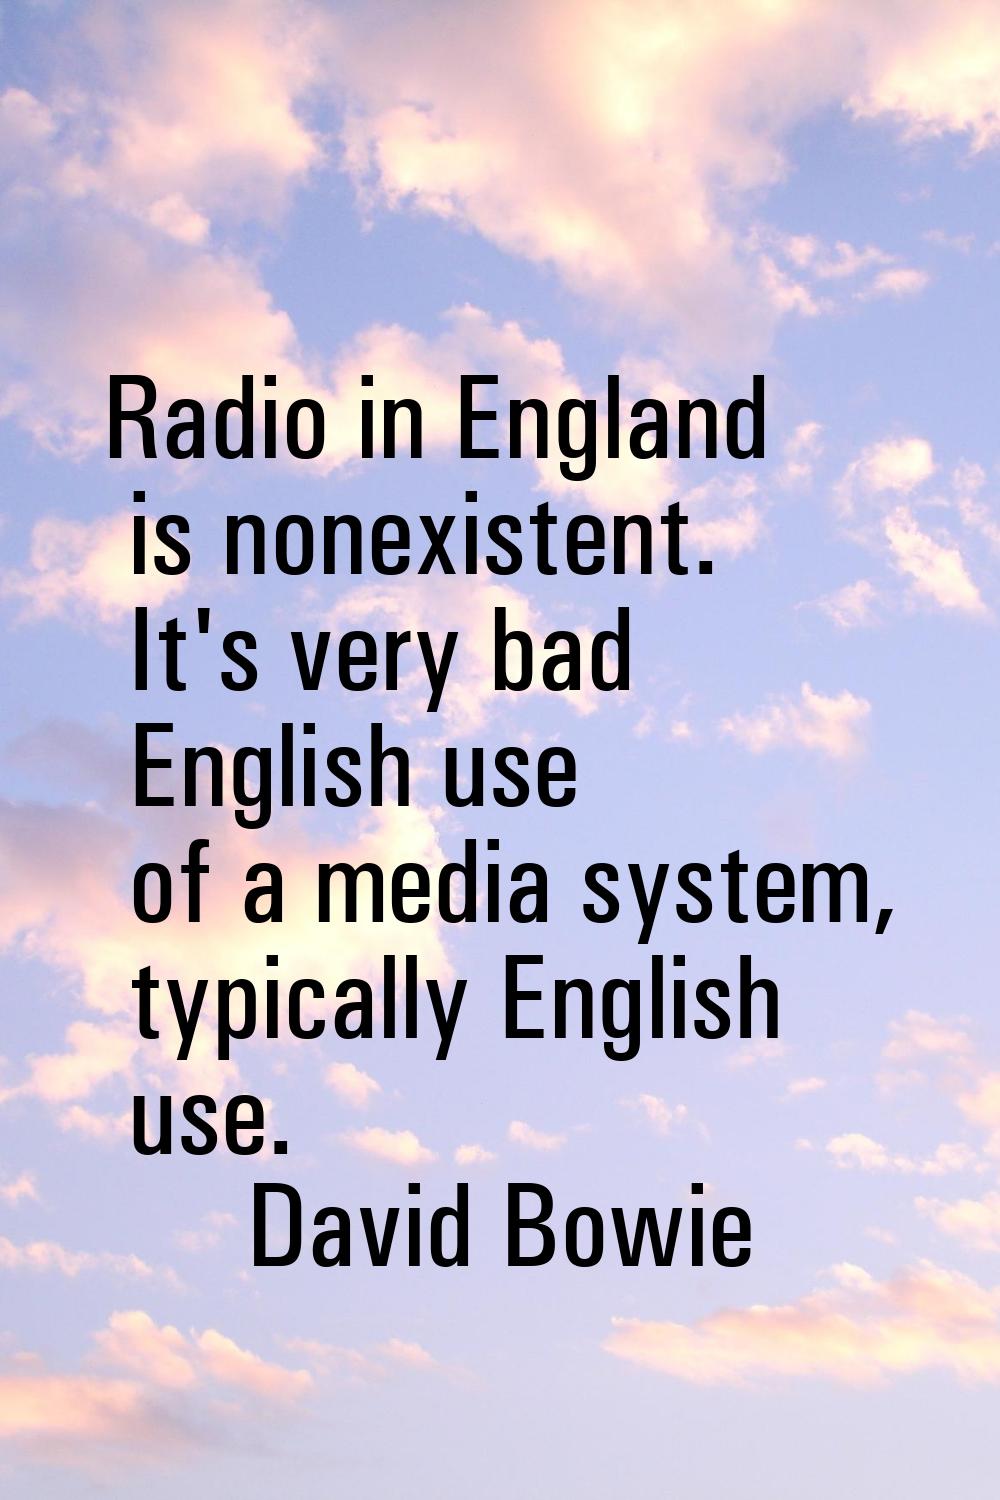 Radio in England is nonexistent. It's very bad English use of a media system, typically English use